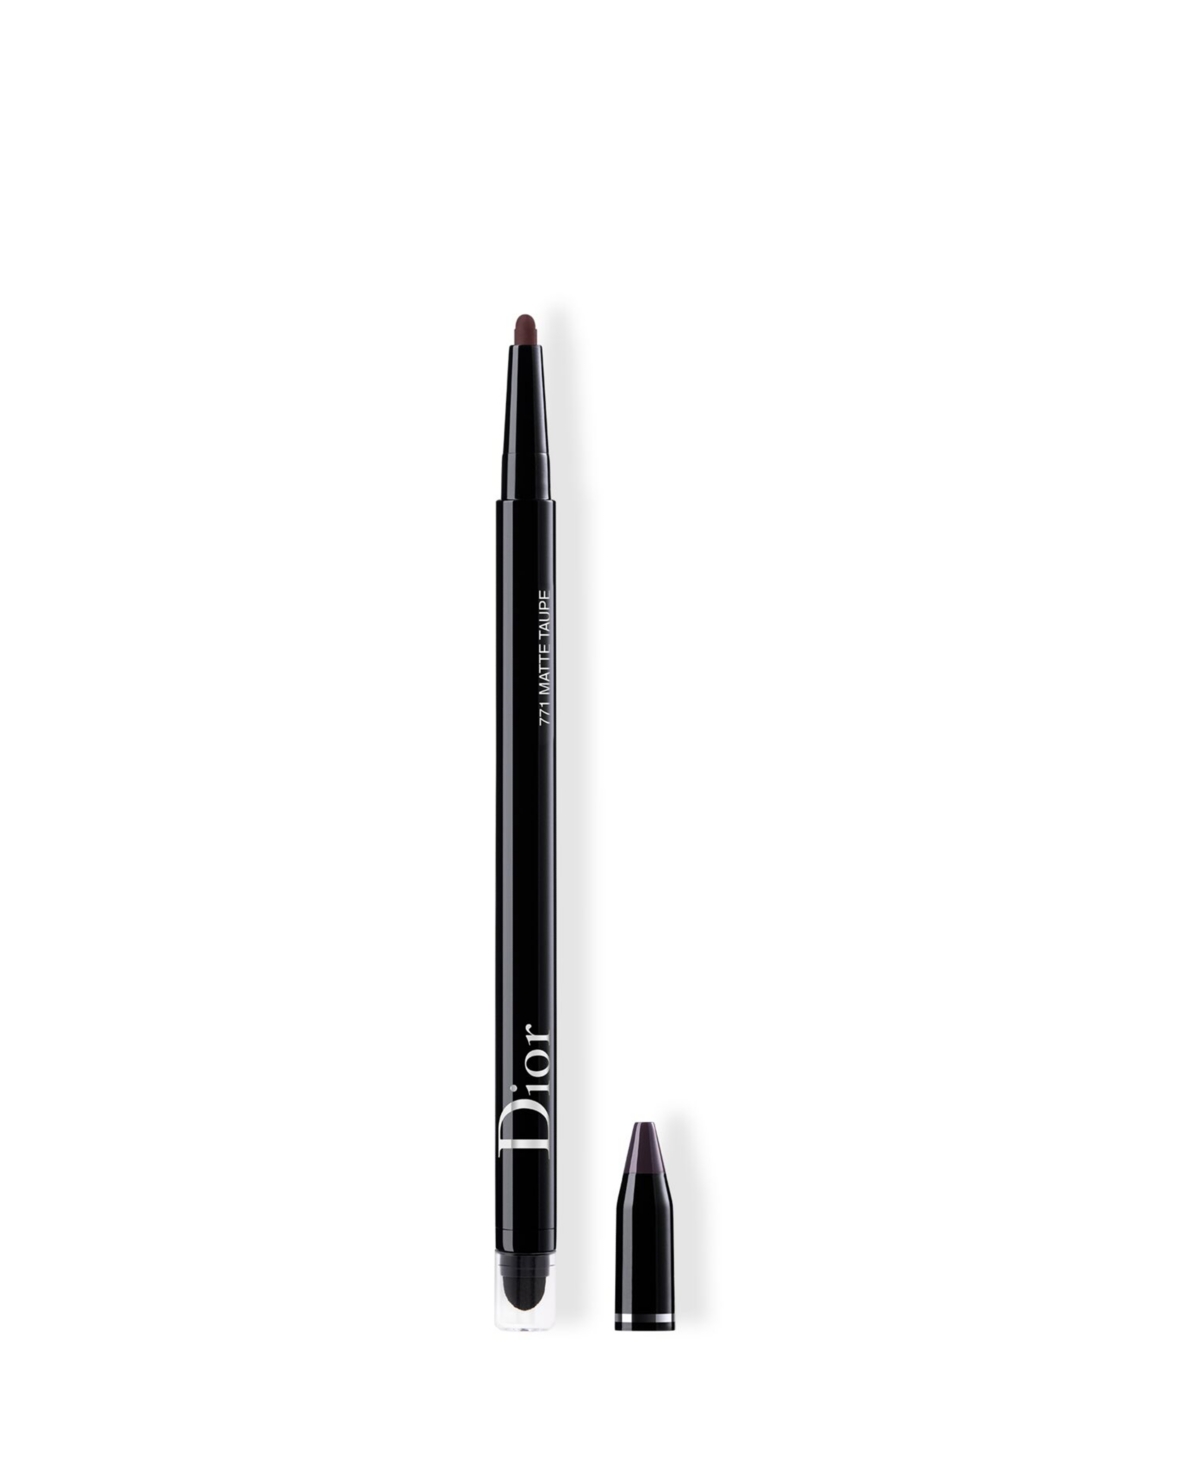 Dior Show 24h Stylo Waterproof Eyeliner In Matte Taupe